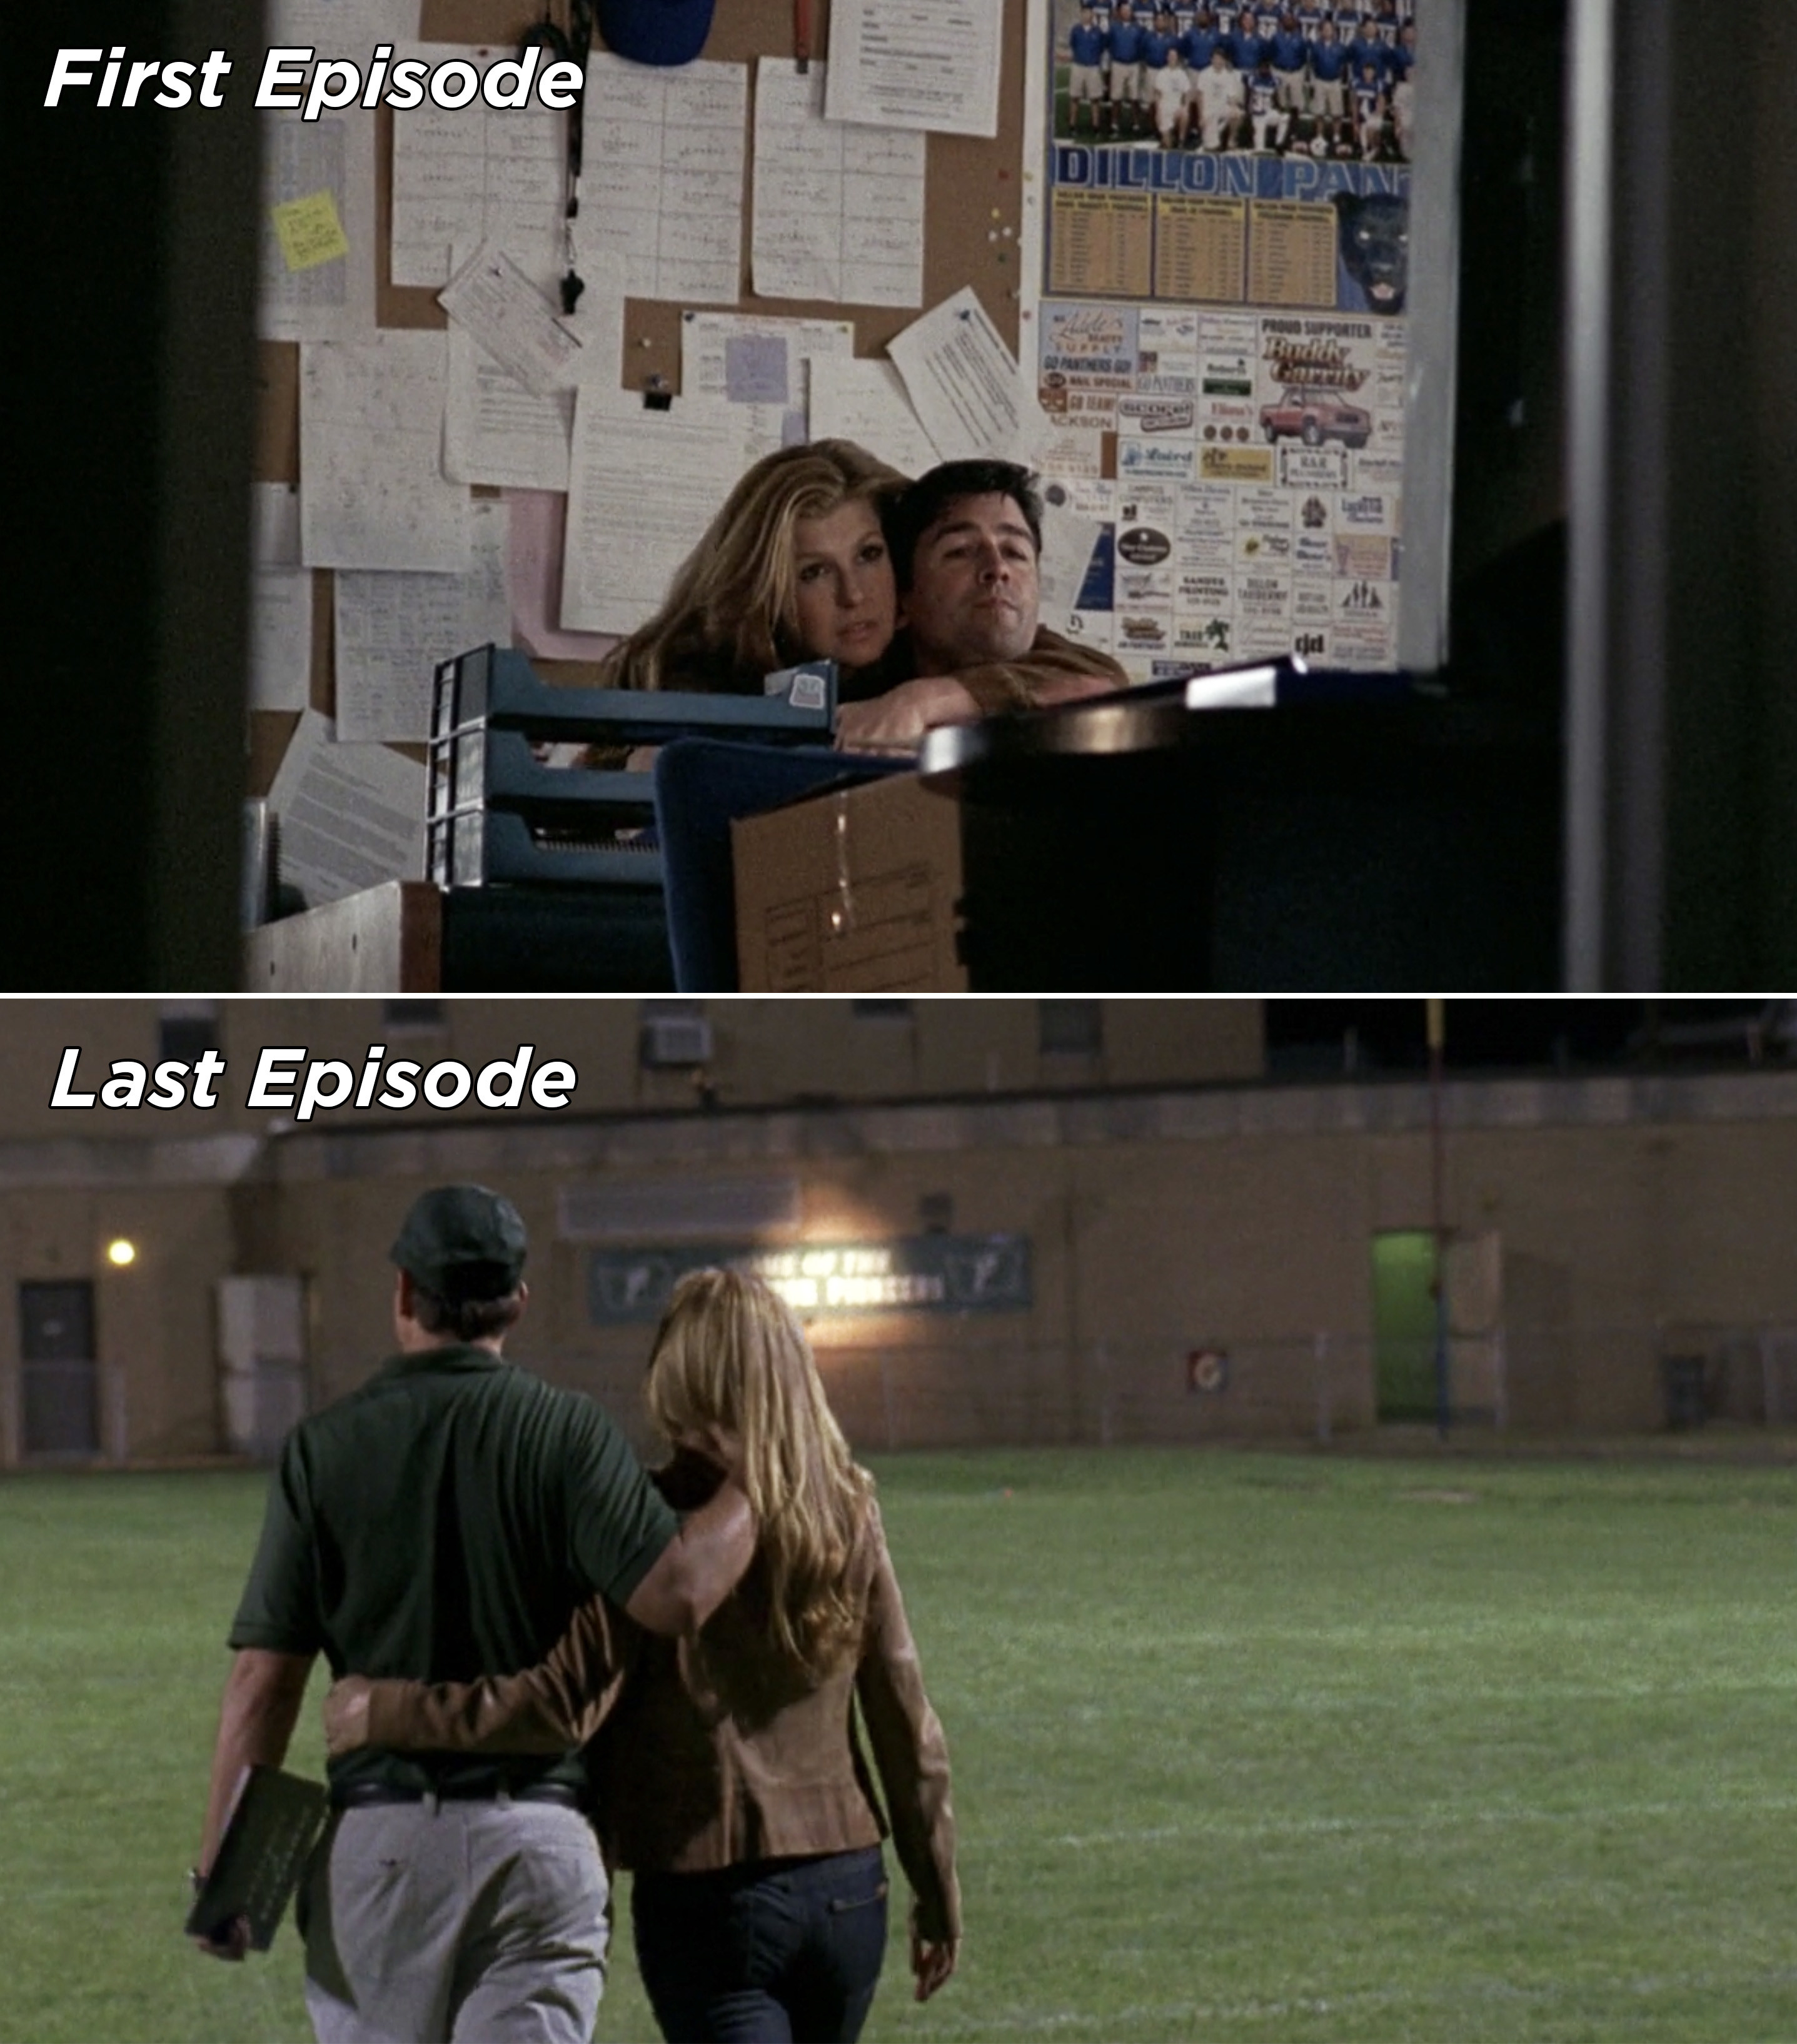 Tami and Coach Taylor in the first and last episode